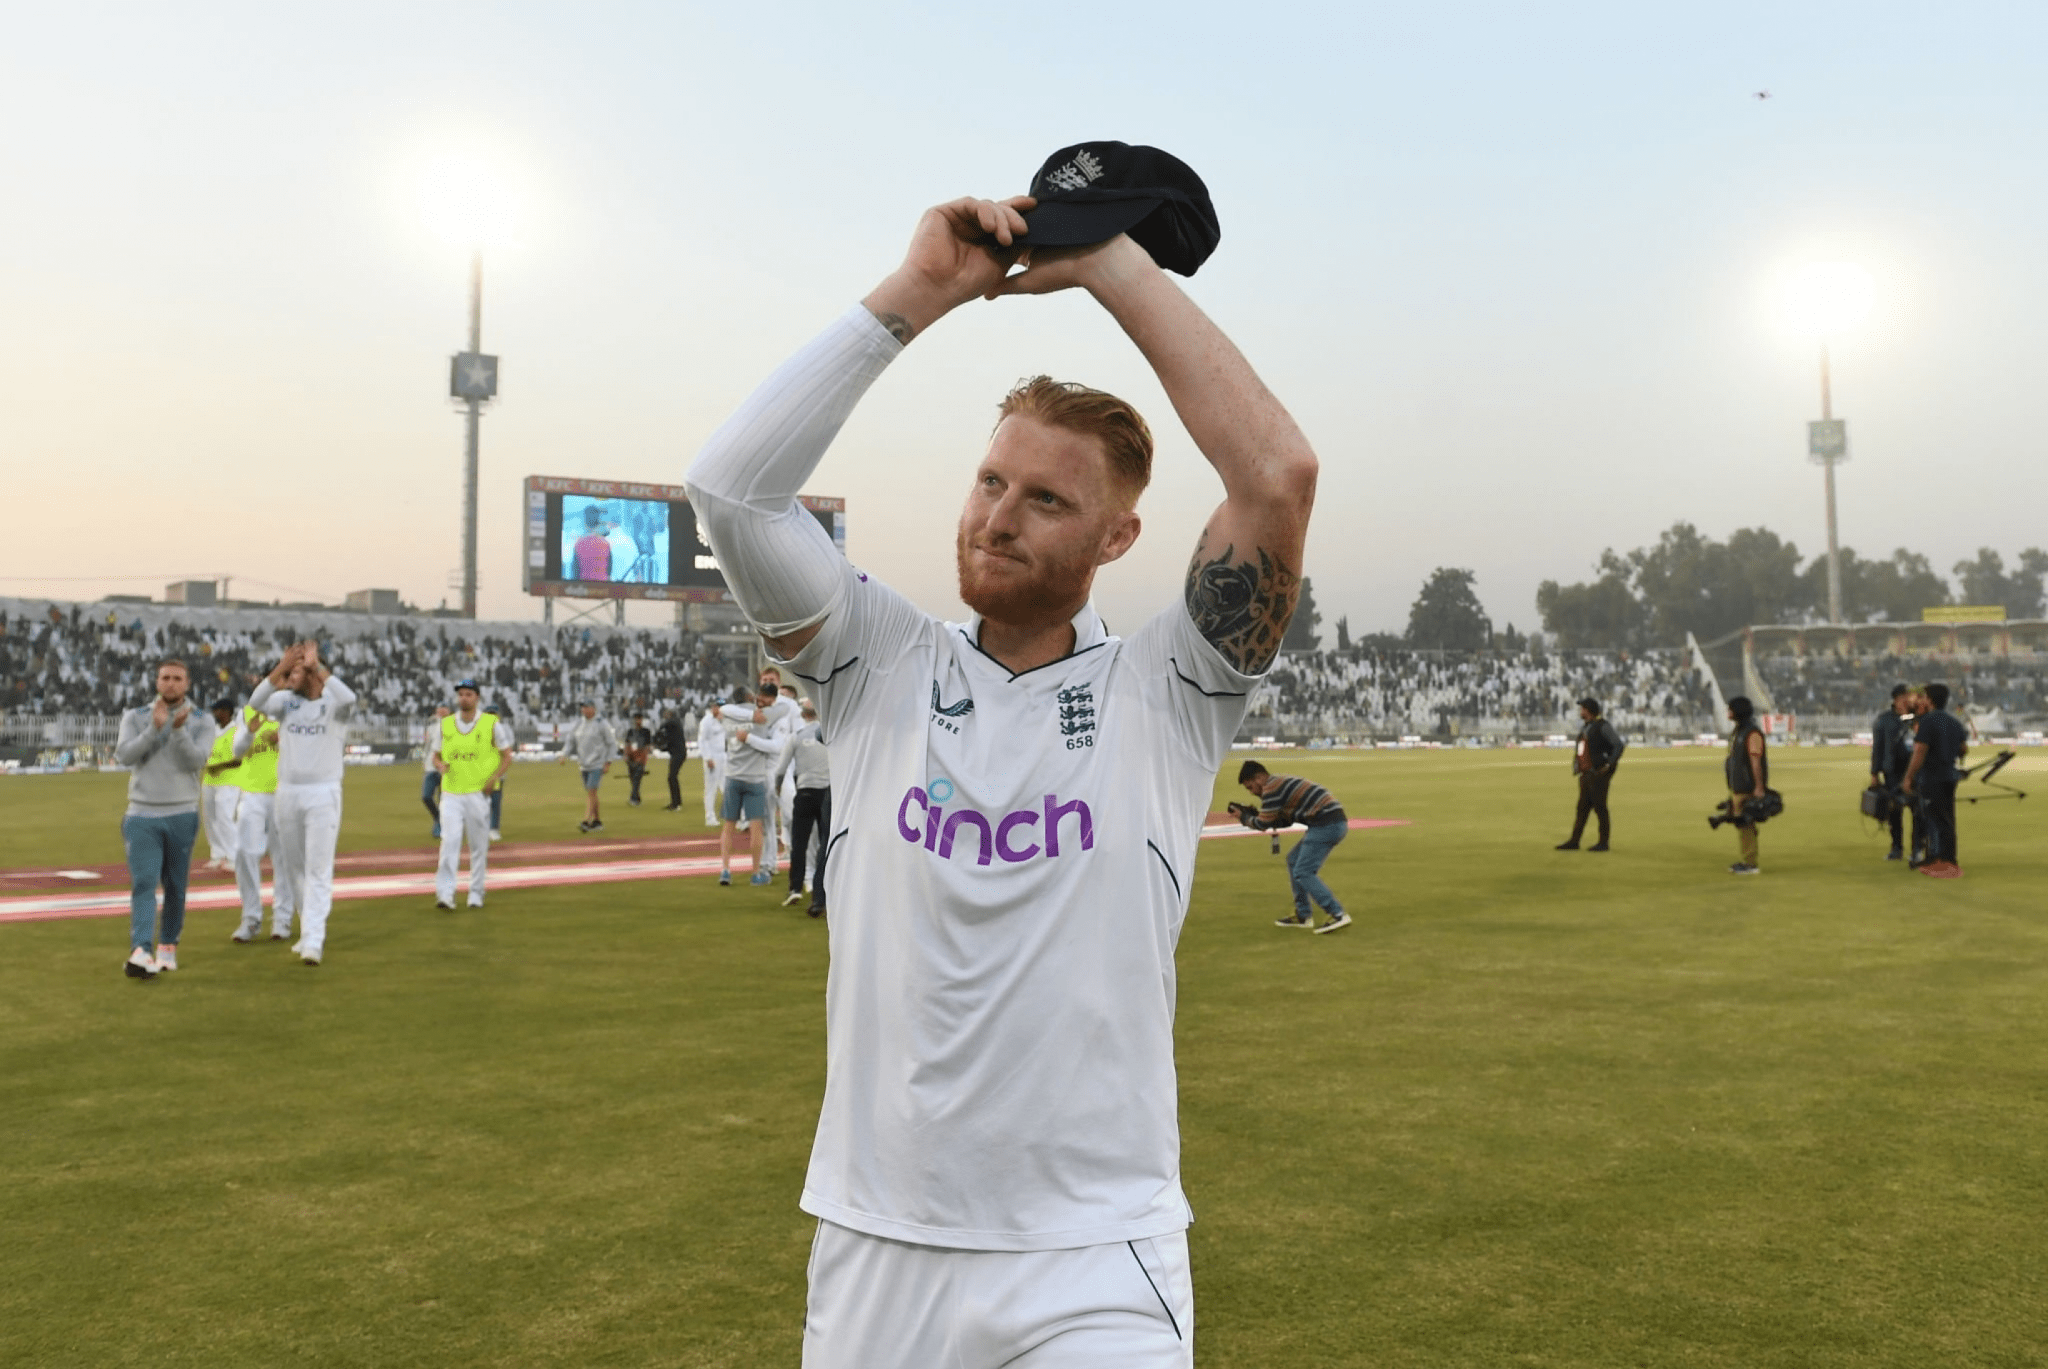 PAK ENG 2ND Test: Pakistan vs England 2nd test starts in Multan on Friday, Ollie Pope set to keep wickets, Check PAK ENG Playing XI & Watch PAK vs ENG LIVE Streaming